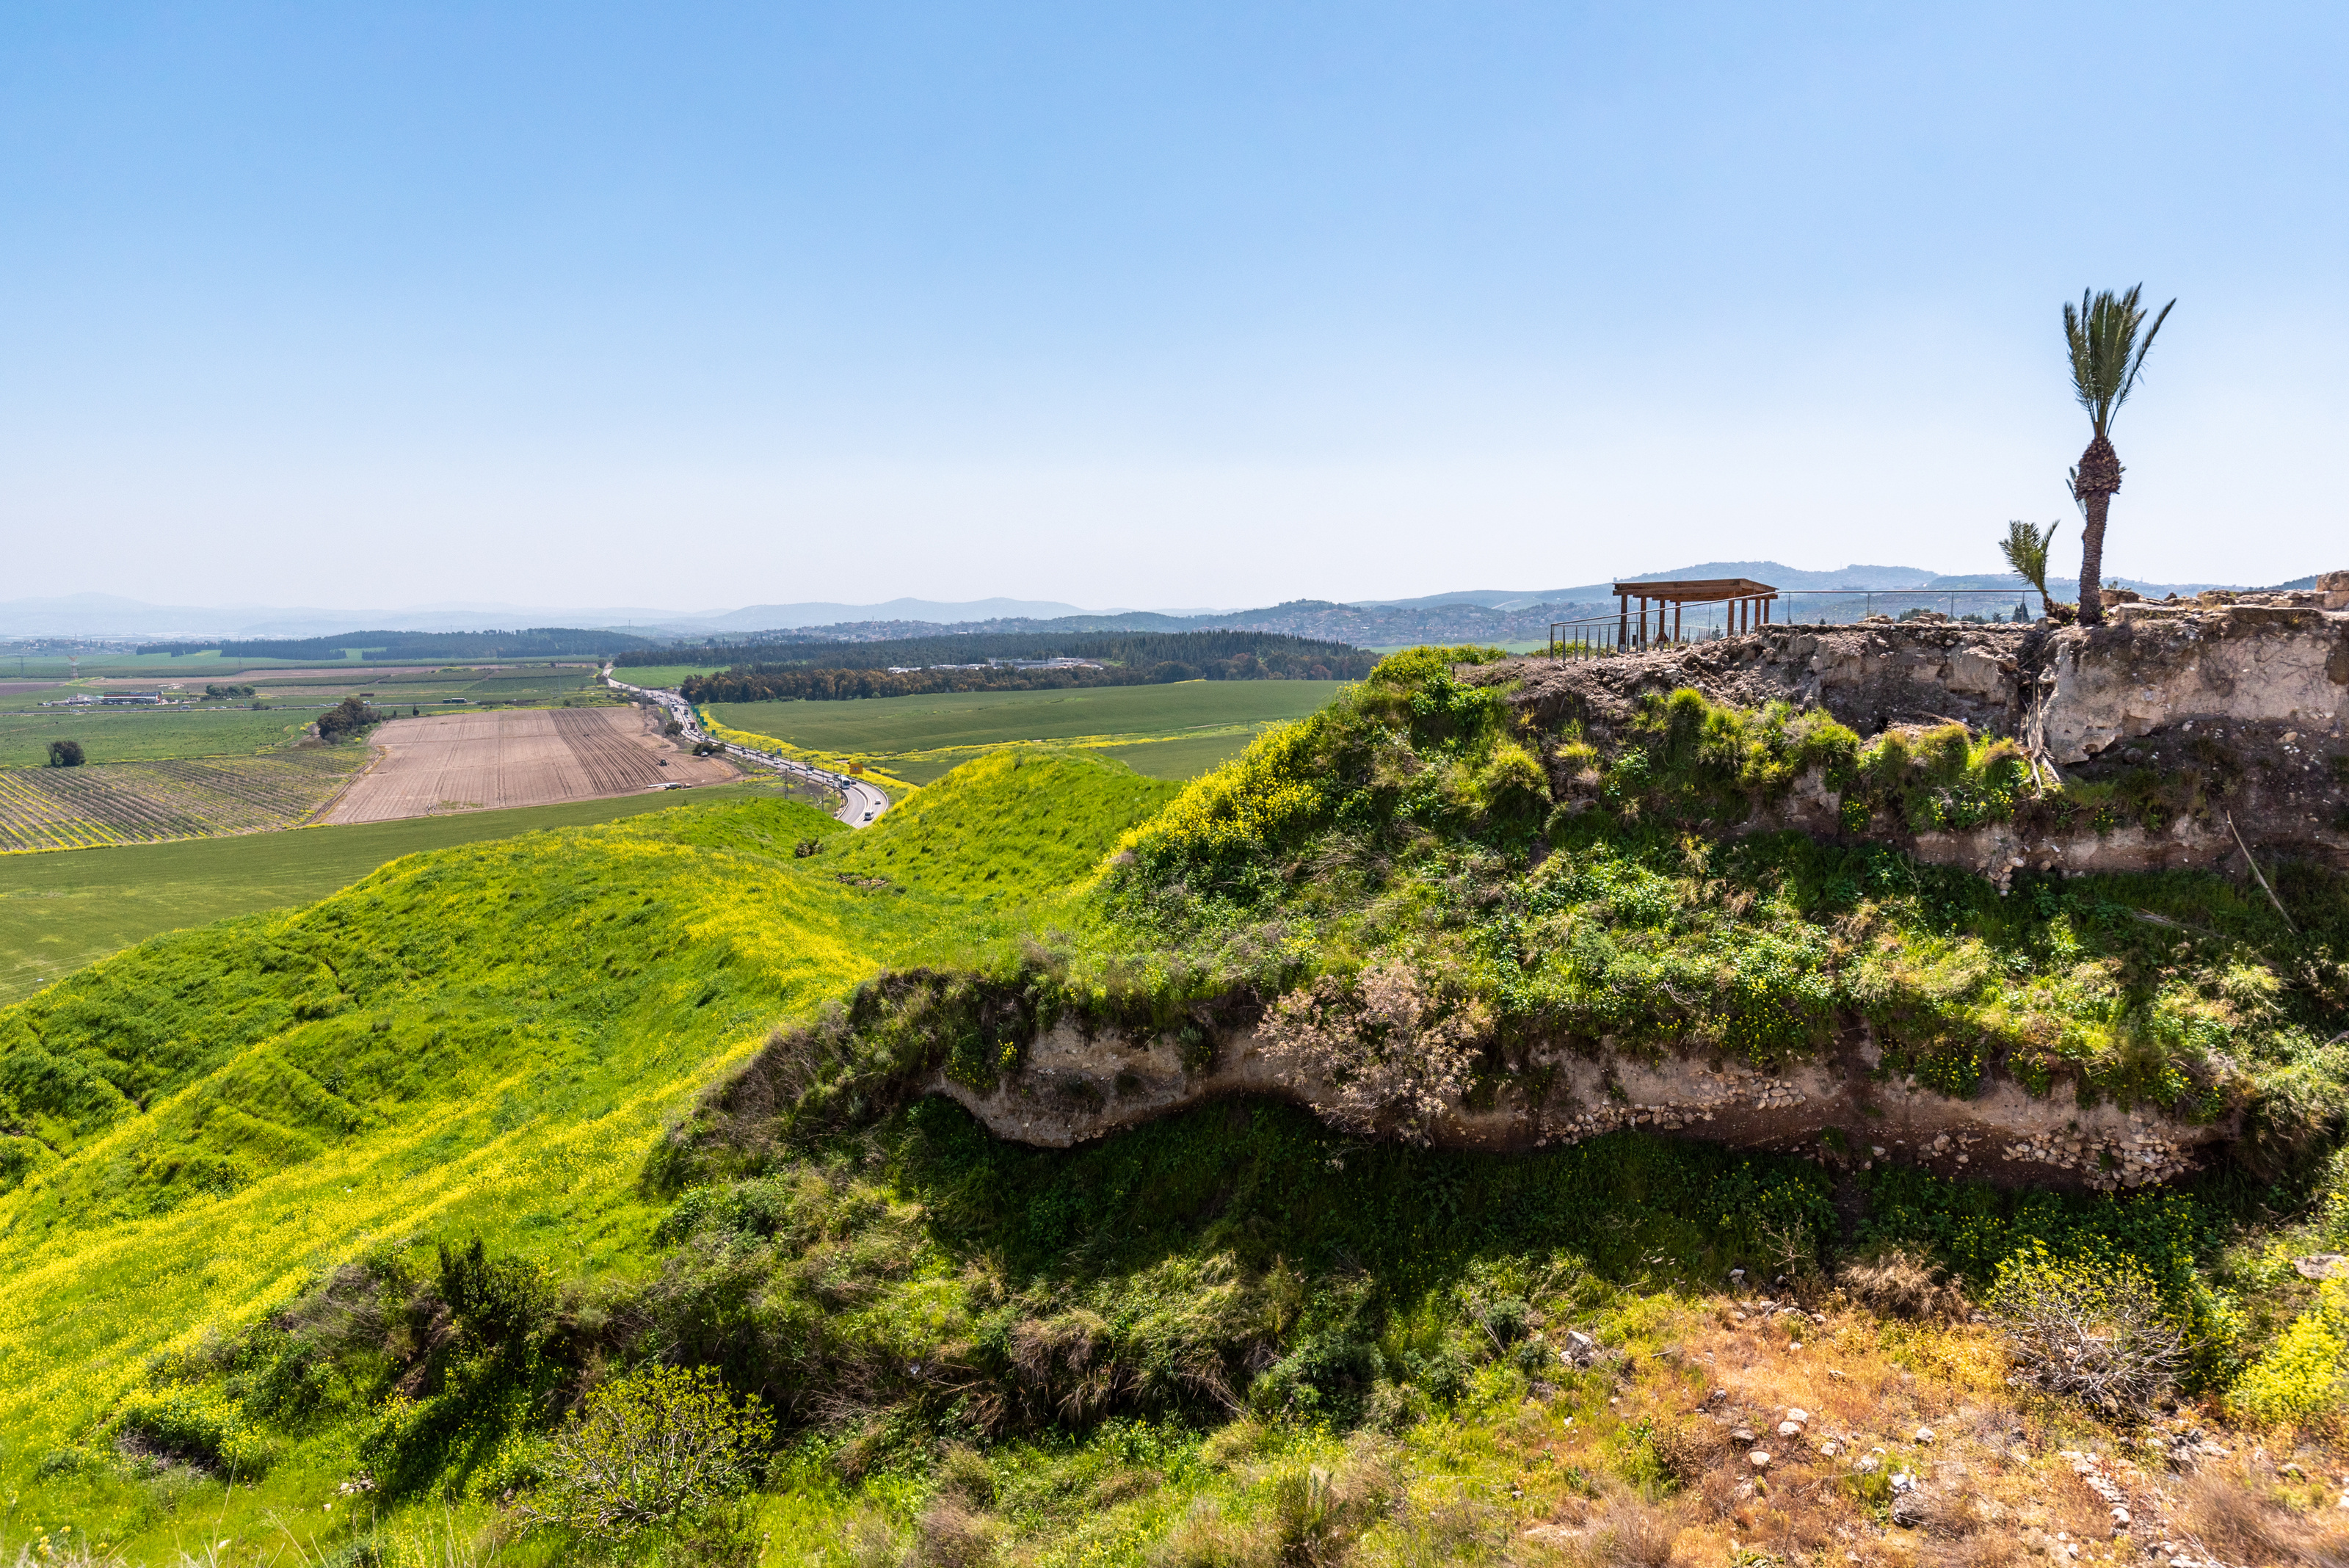 The view from Tel Megiddo Nation Park of the Jezreel Valley in Israel.